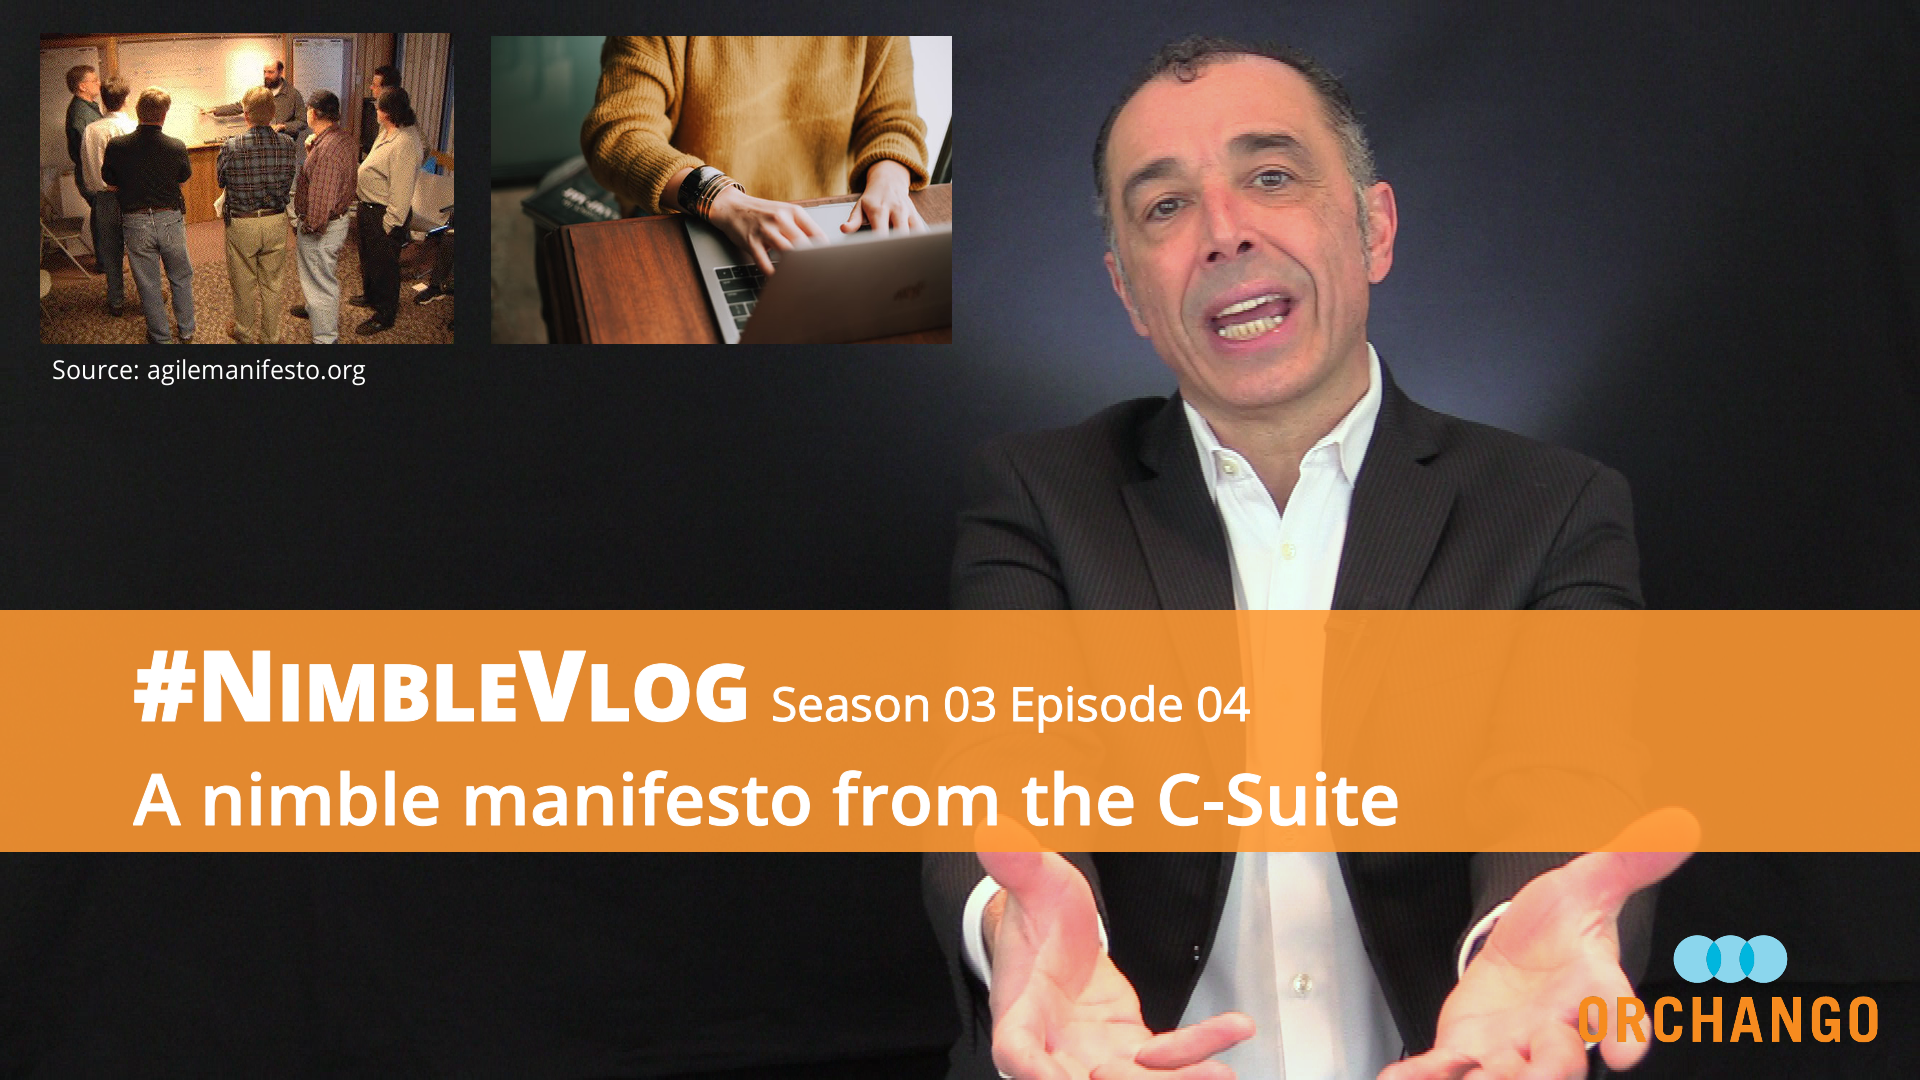 #NimbleVlog - S03 E04 A nimble manifesto from the C-Suite